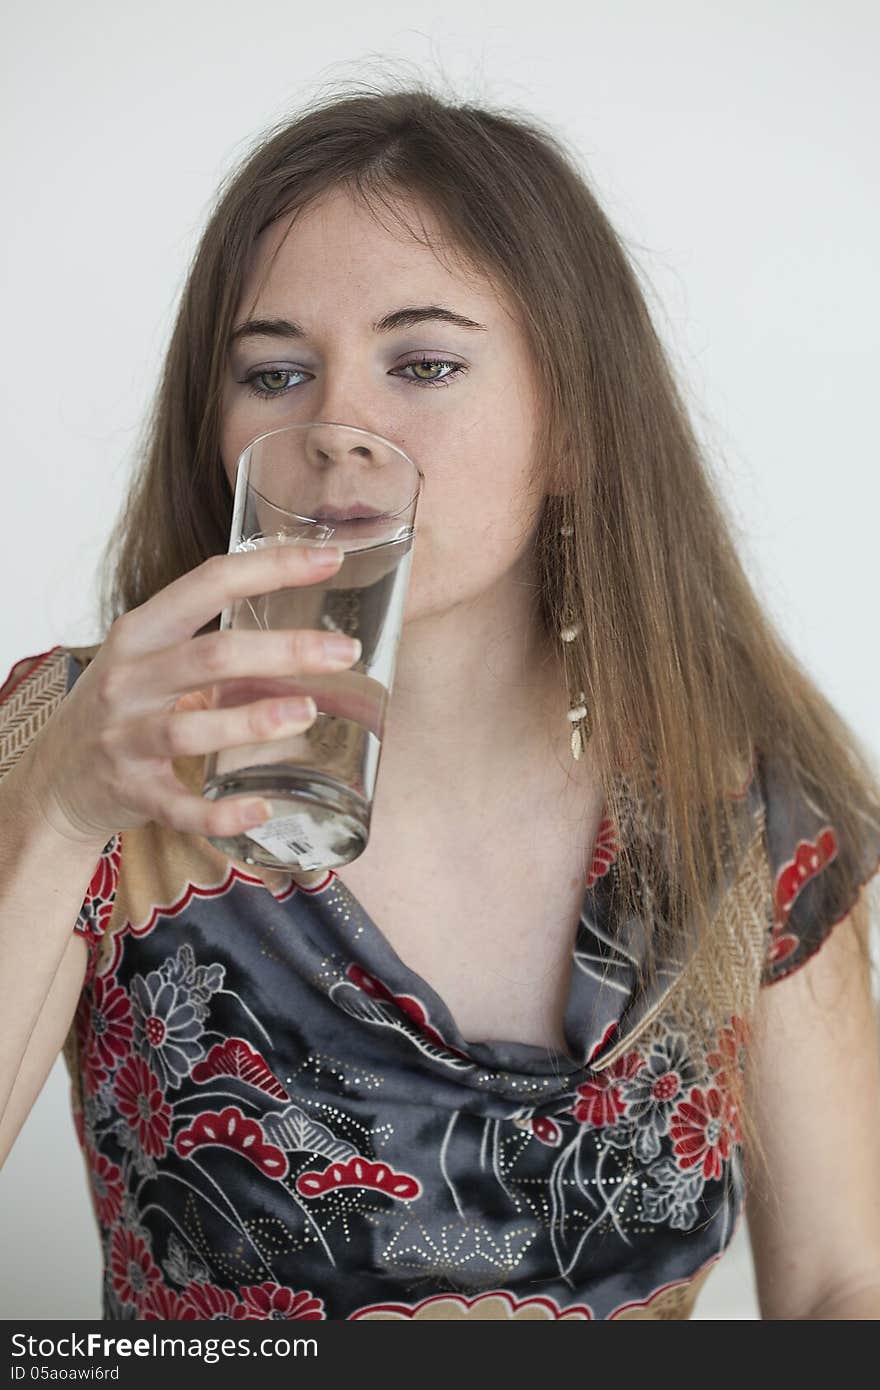 Portrait of a young woman drinking a glass of water. Portrait of a young woman drinking a glass of water.